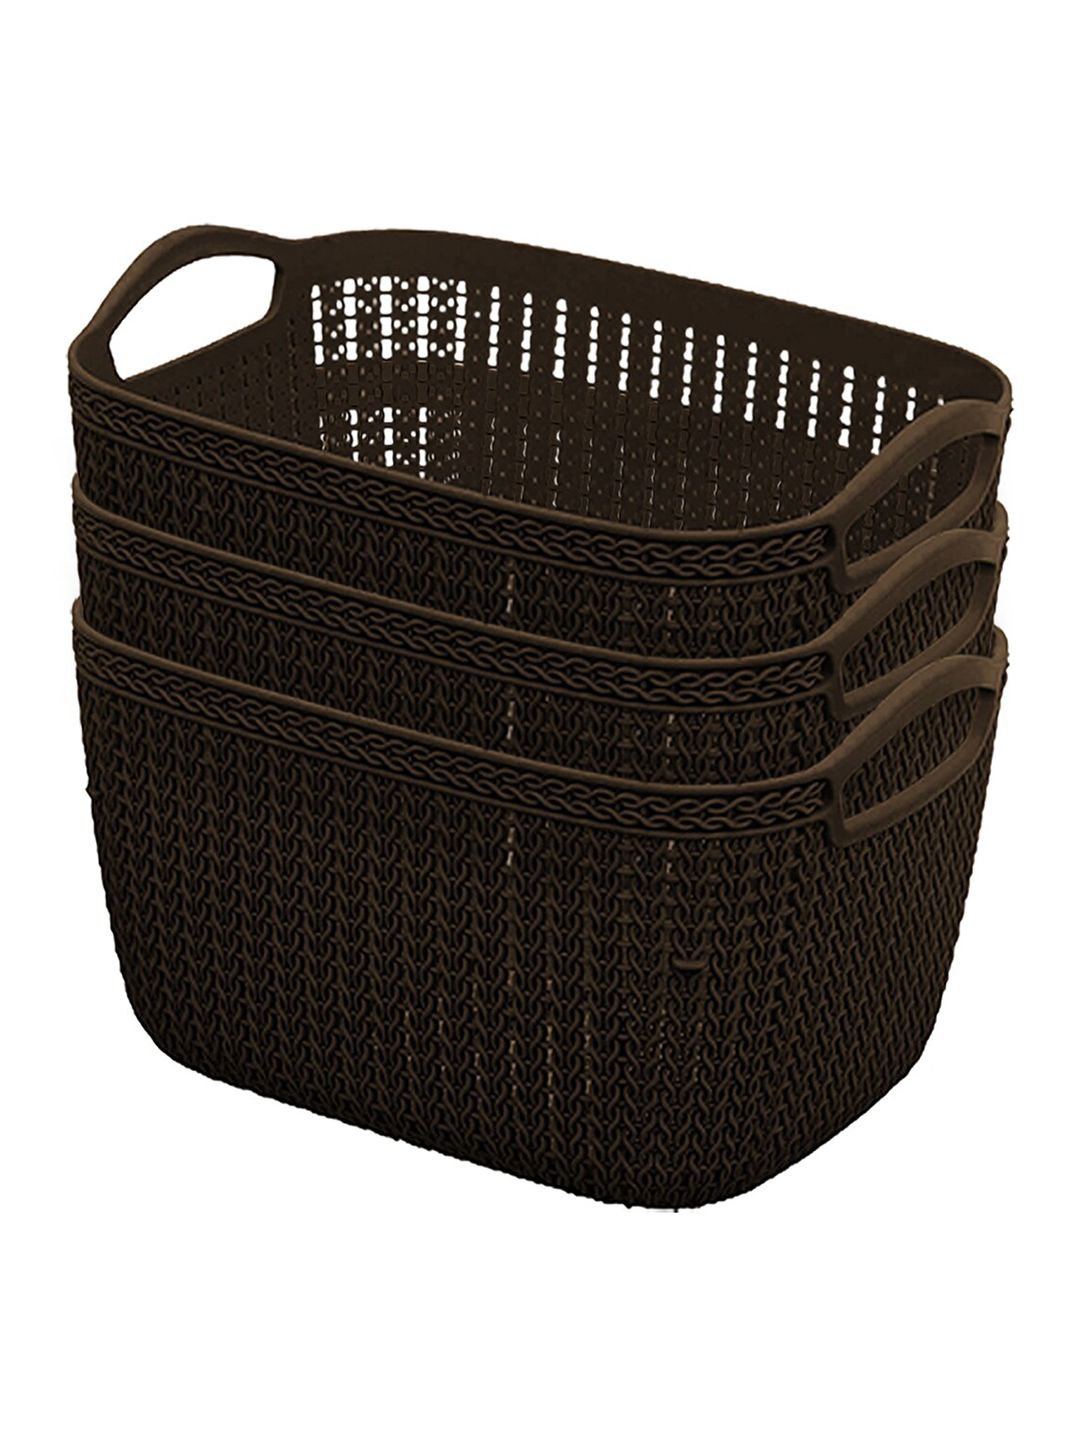 Kuber Industries Set Of 3 Brown Textured Plastic Baskets Price in India